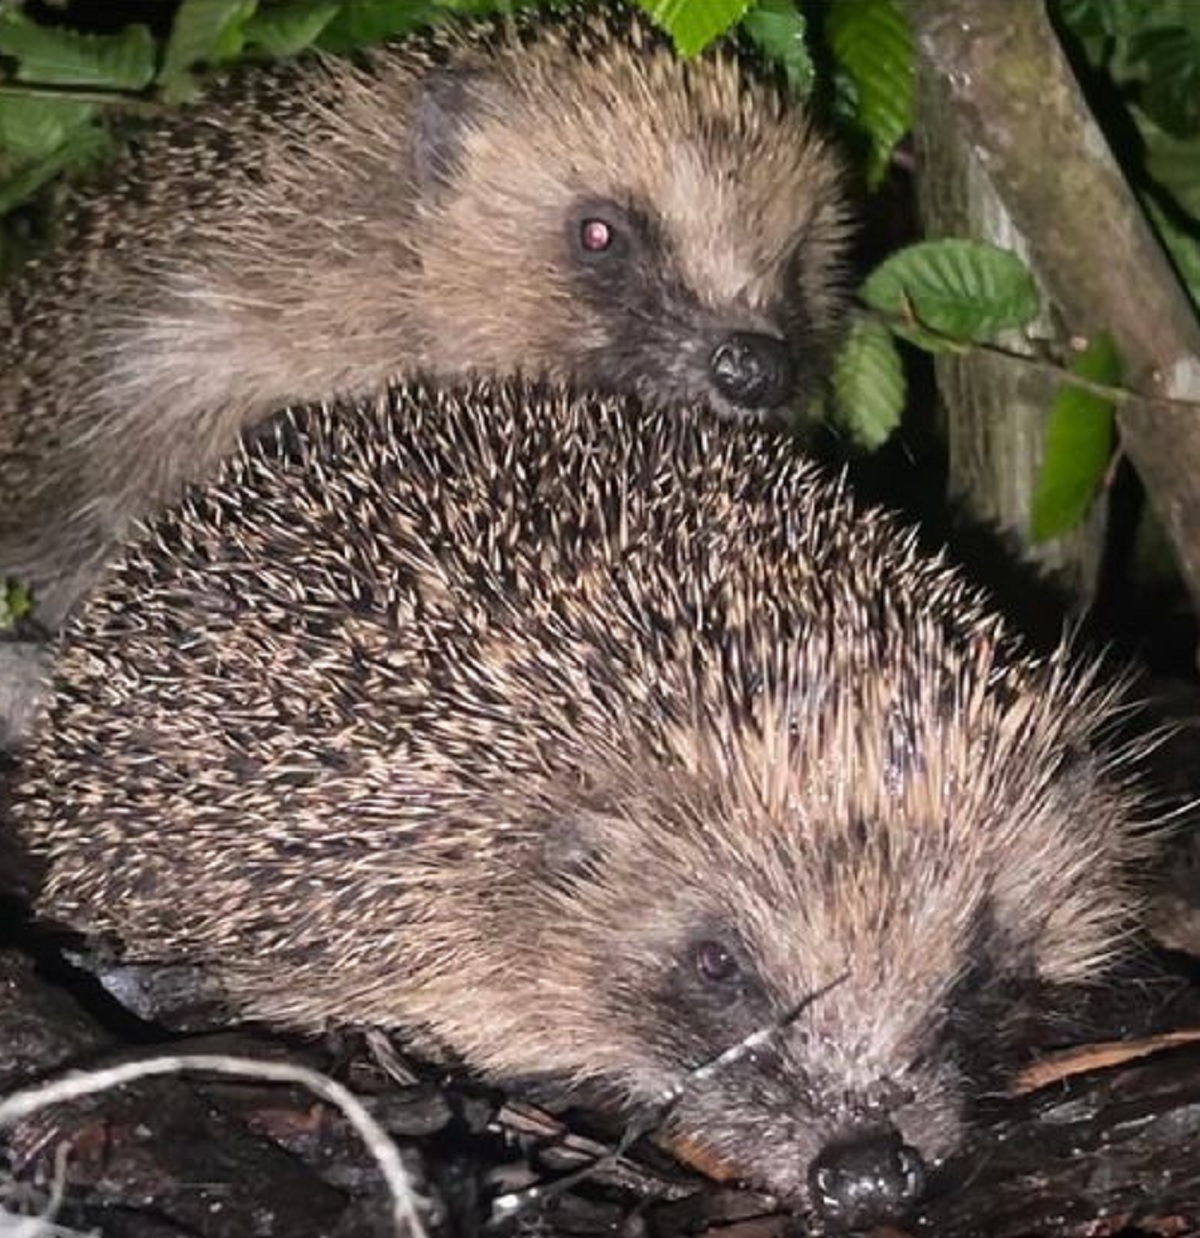 Prick of the bunch - Andy Matthias was delighted to photograph these hedgehogs in Colchester